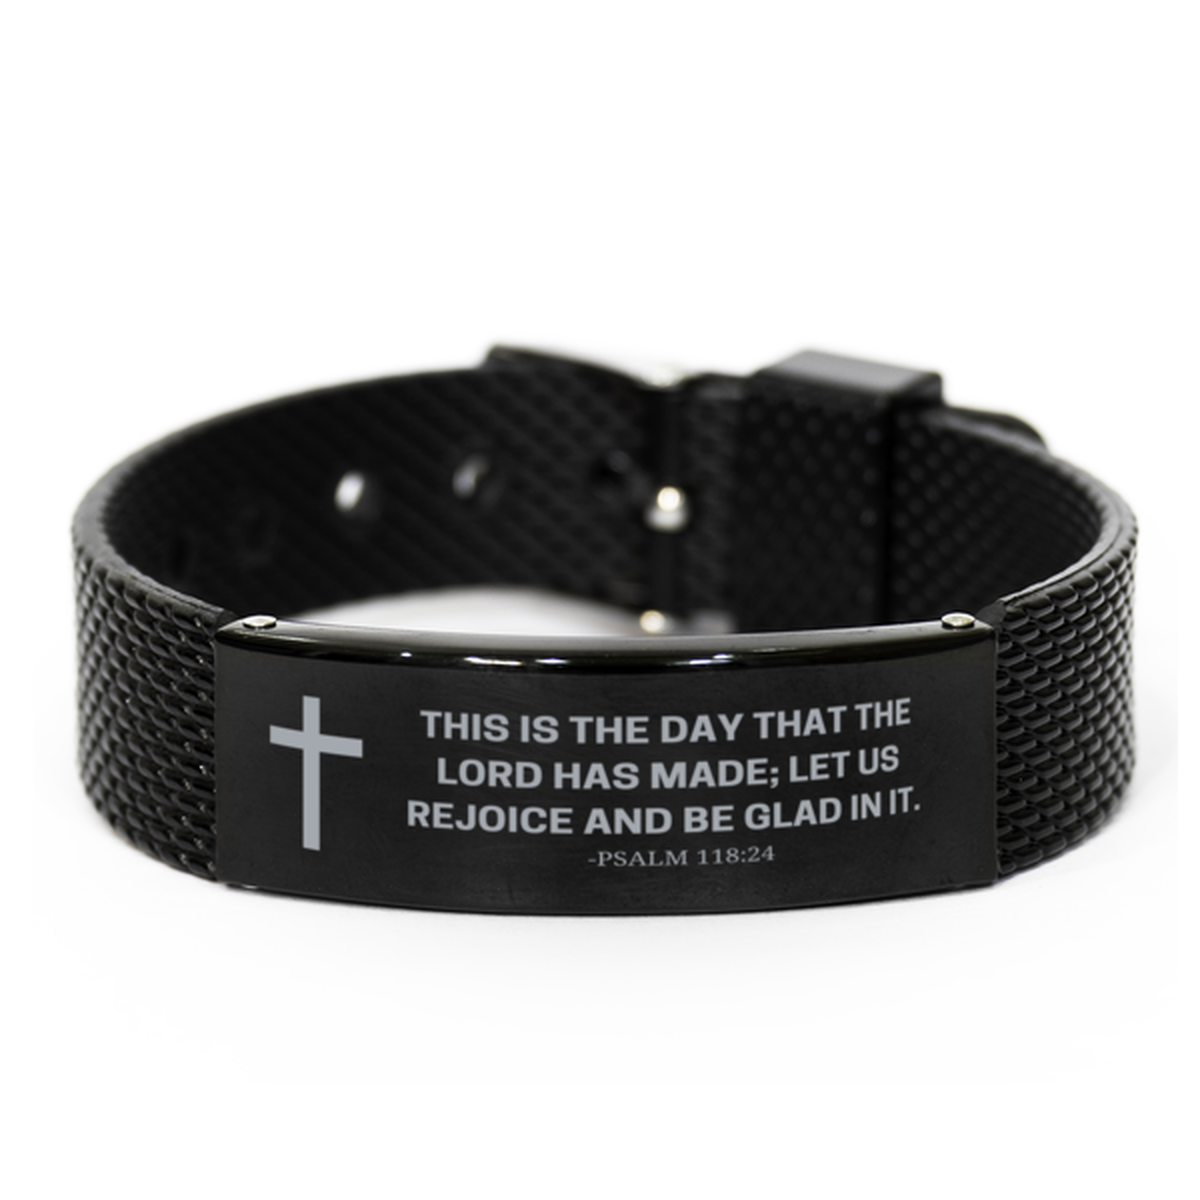 Baptism Gifts For Teenage Boys Girls, Christian Bible Verse Black Shark Mesh Bracelet, This is the day that the lord has made, Catholic Confirmation Gifts for Son, Godson, Grandson, Nephew